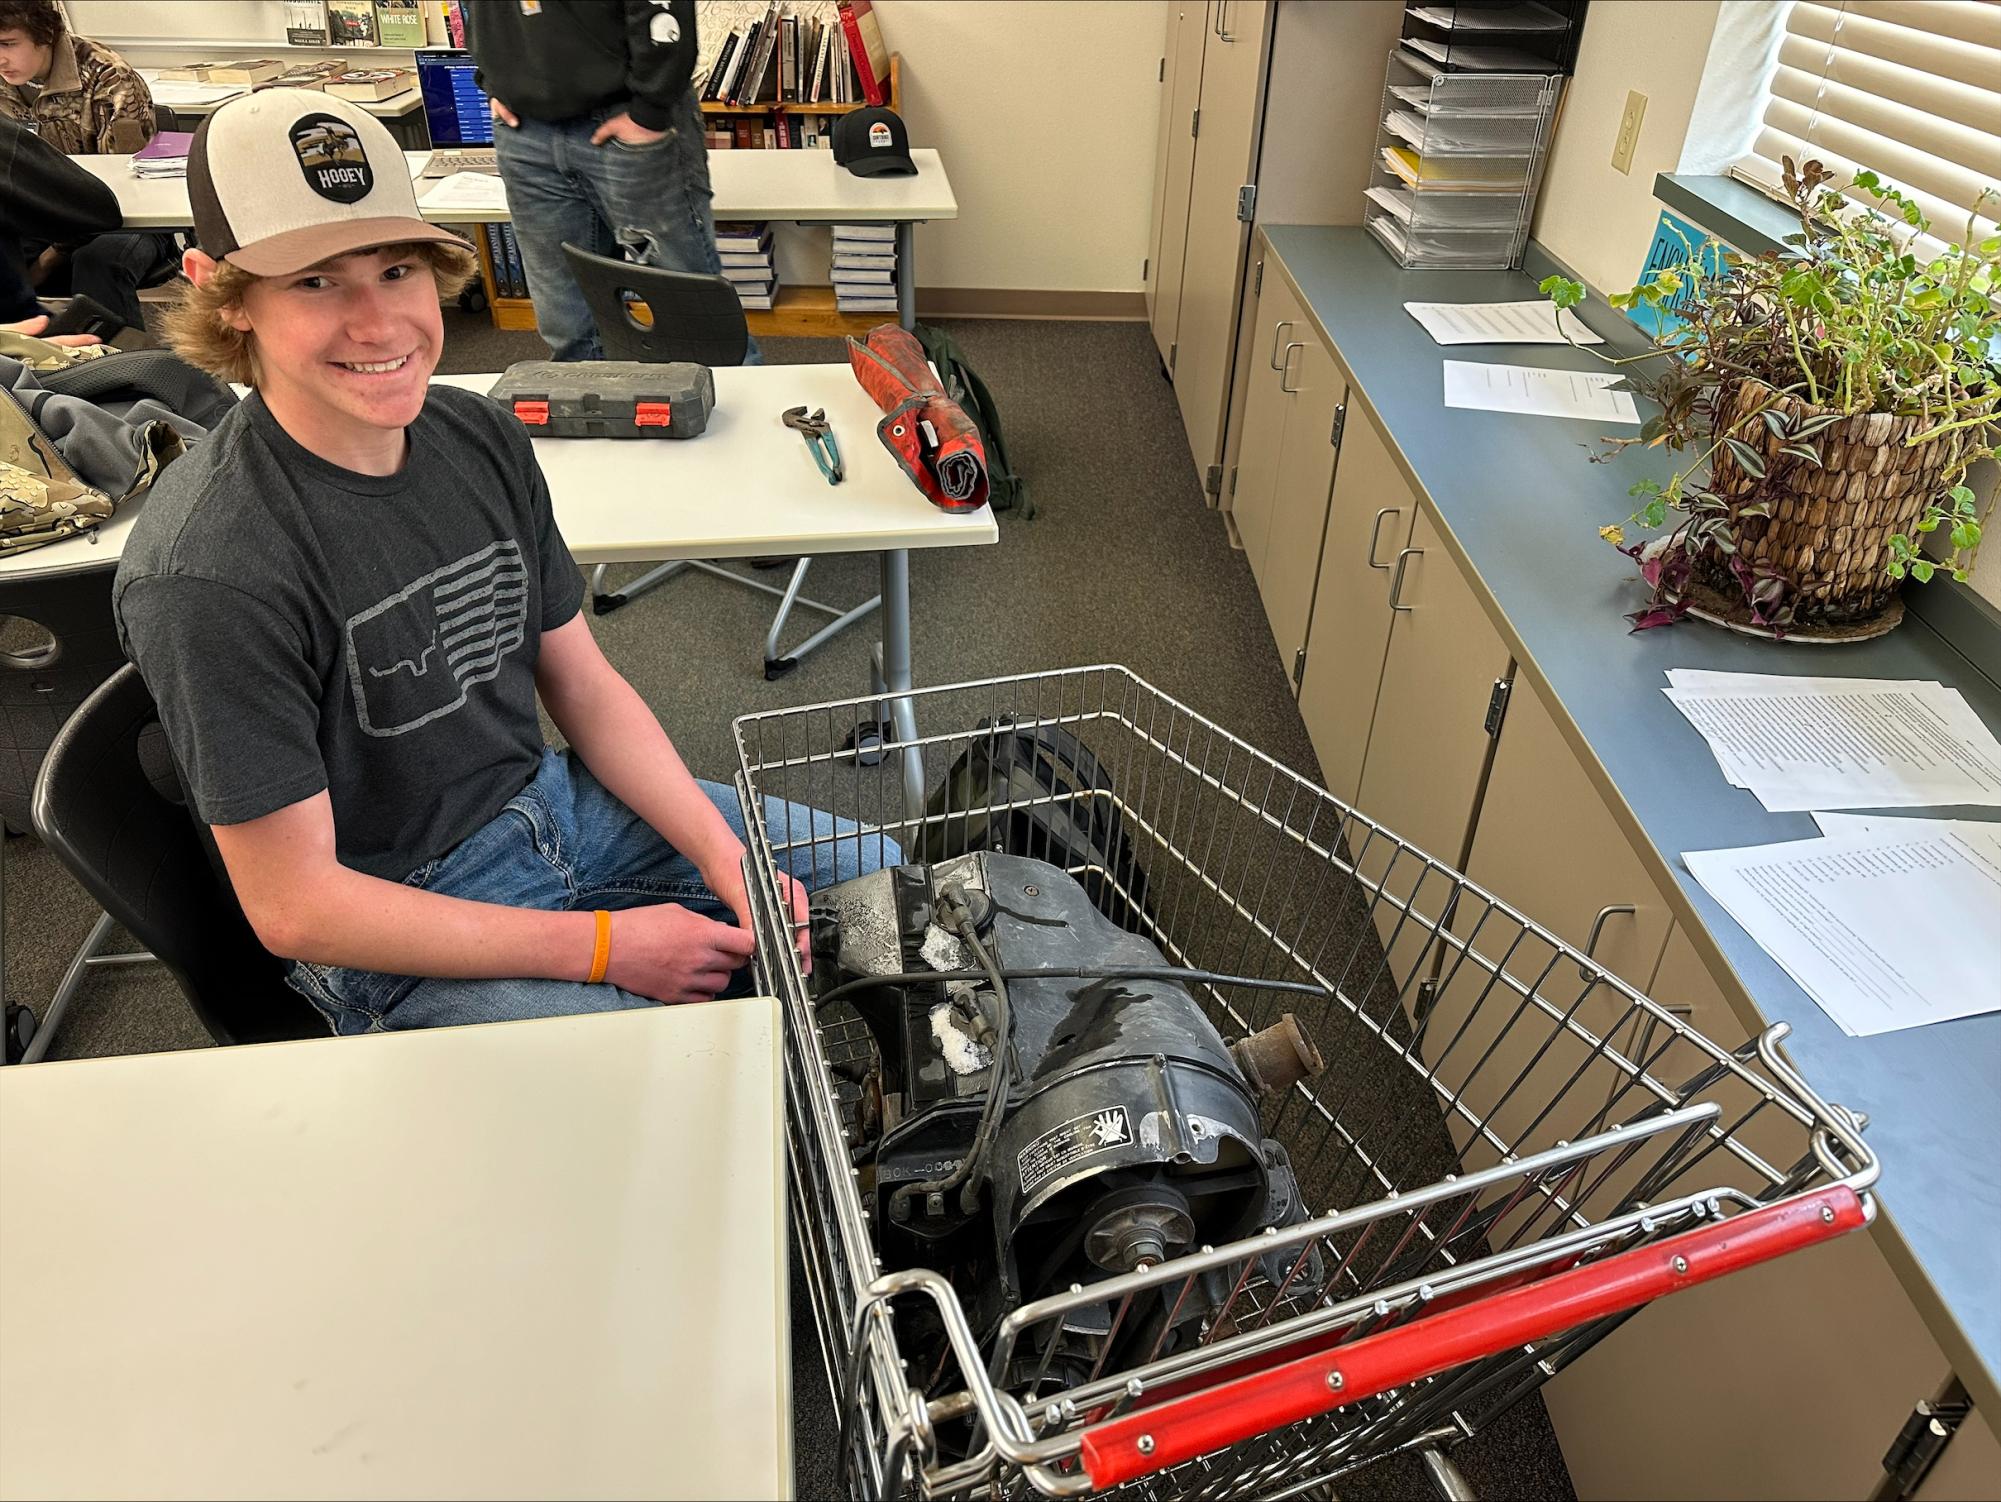 Weston Thompson proudly poses with his work-in-progress go-kart that he brought to school to work on.  